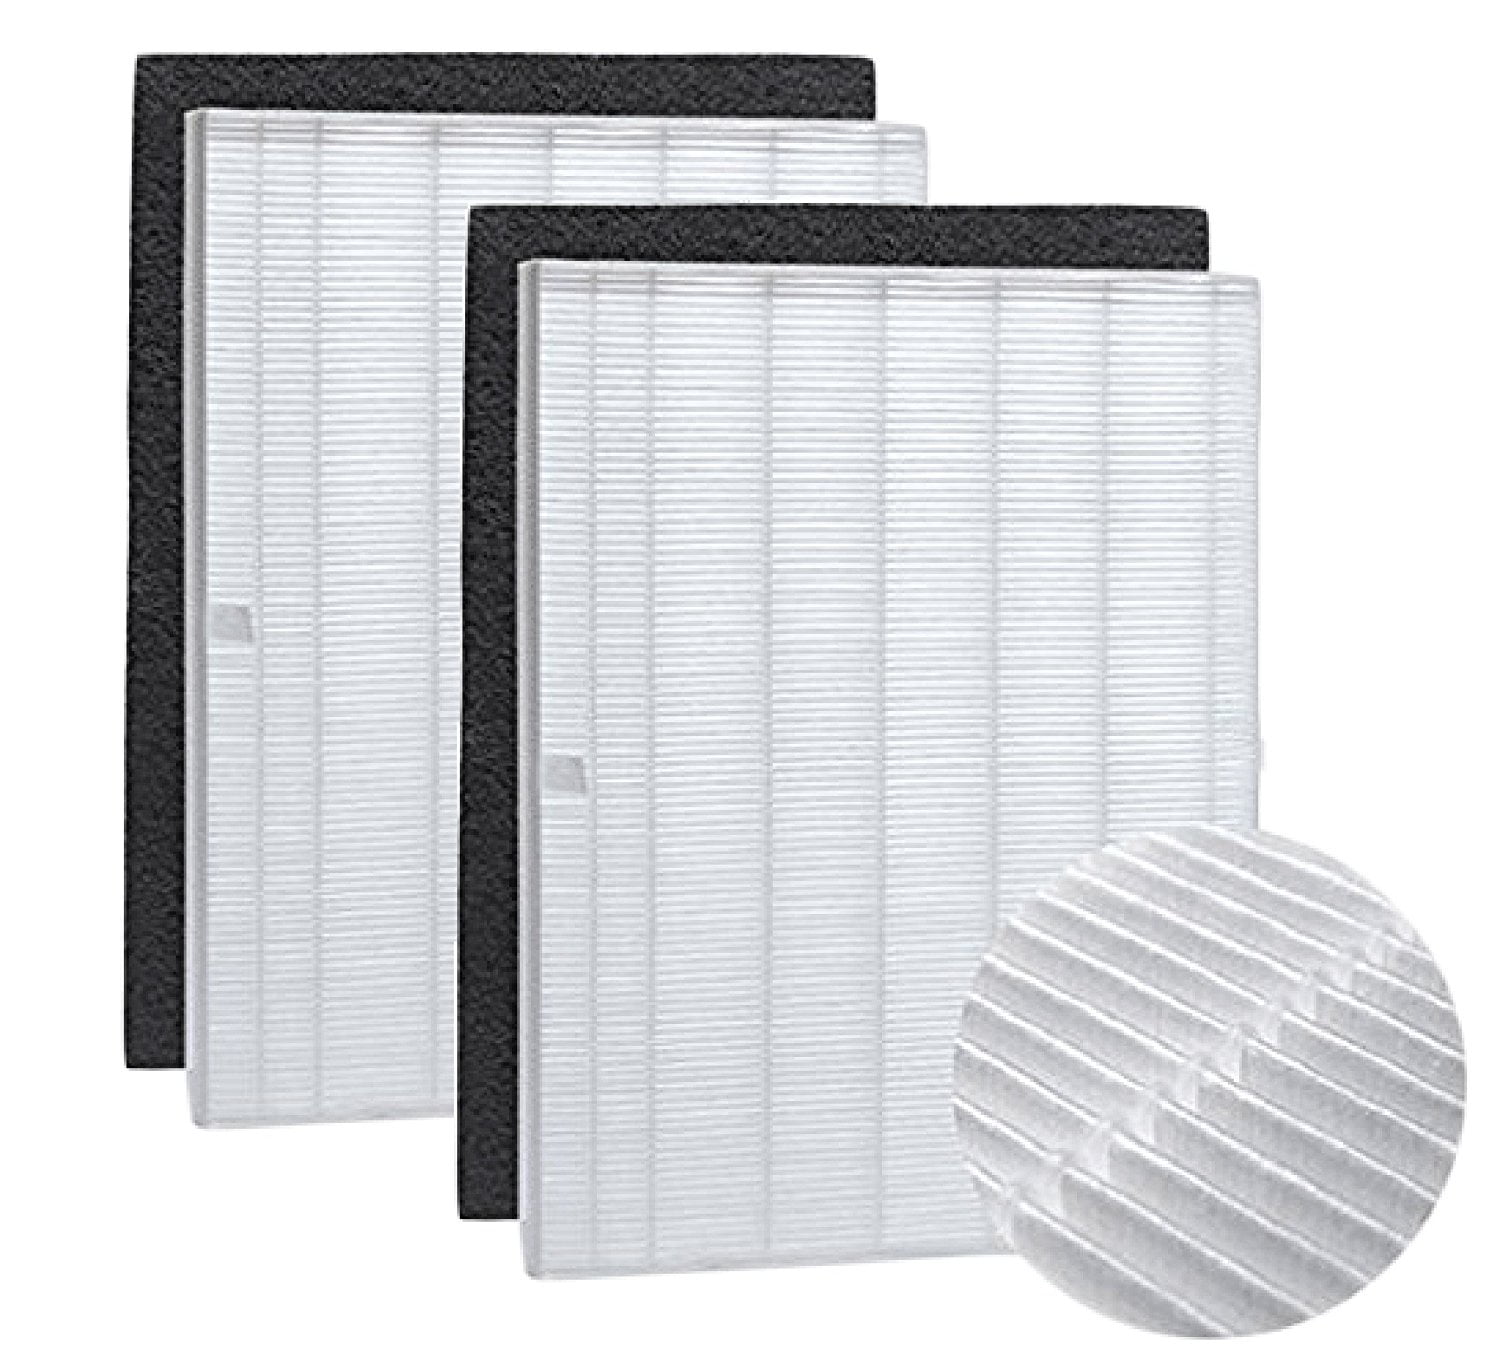 Winix Size 25 Replacement HEPA Filter Set for P450 Air Cleaner for sale online 